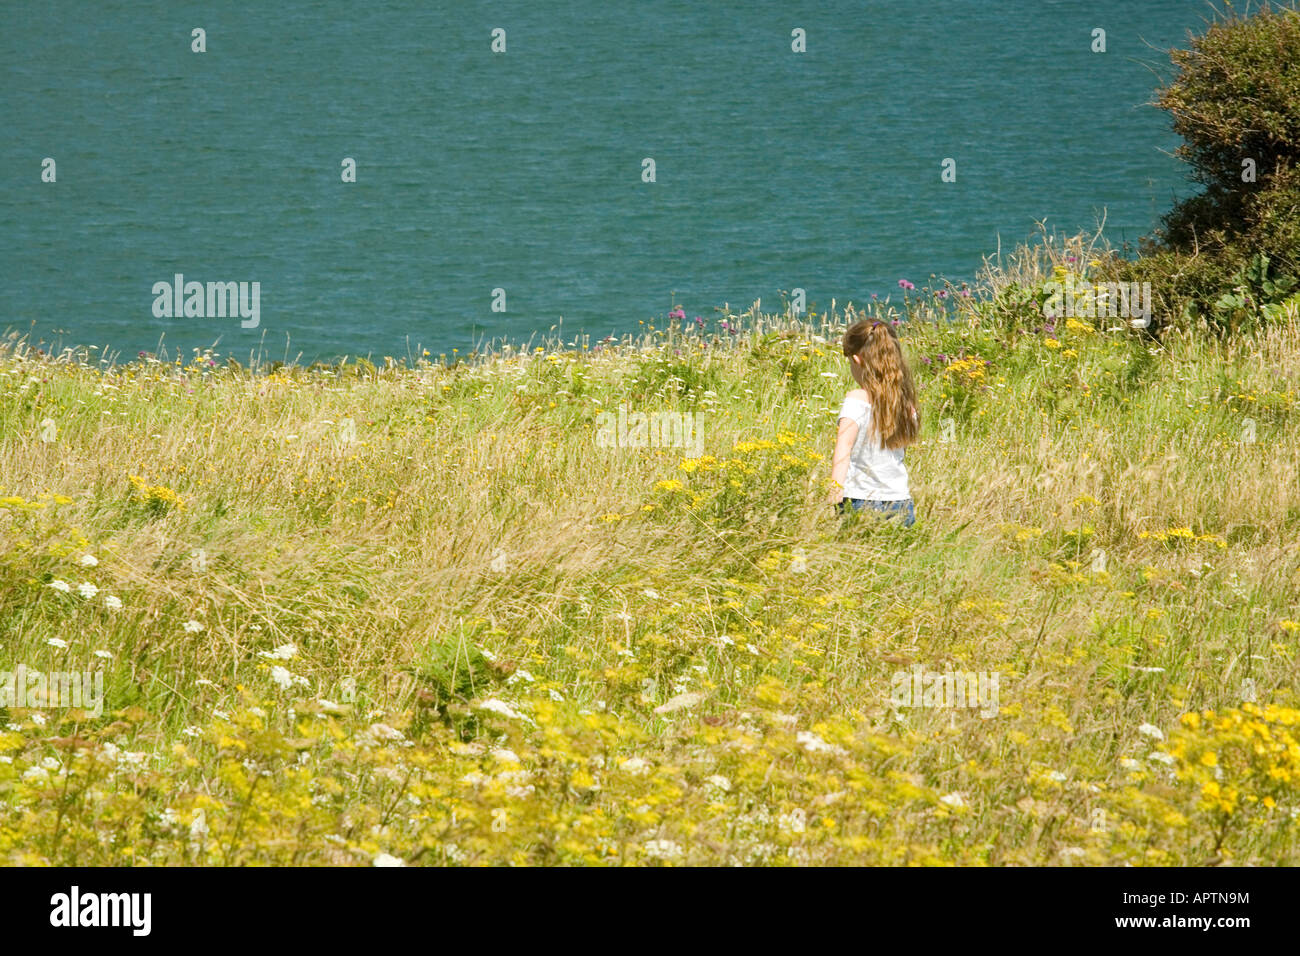 Young girl walking in wild flower meadow on top of cliffs overlooking sea Purbeck Dorset UK Stock Photo